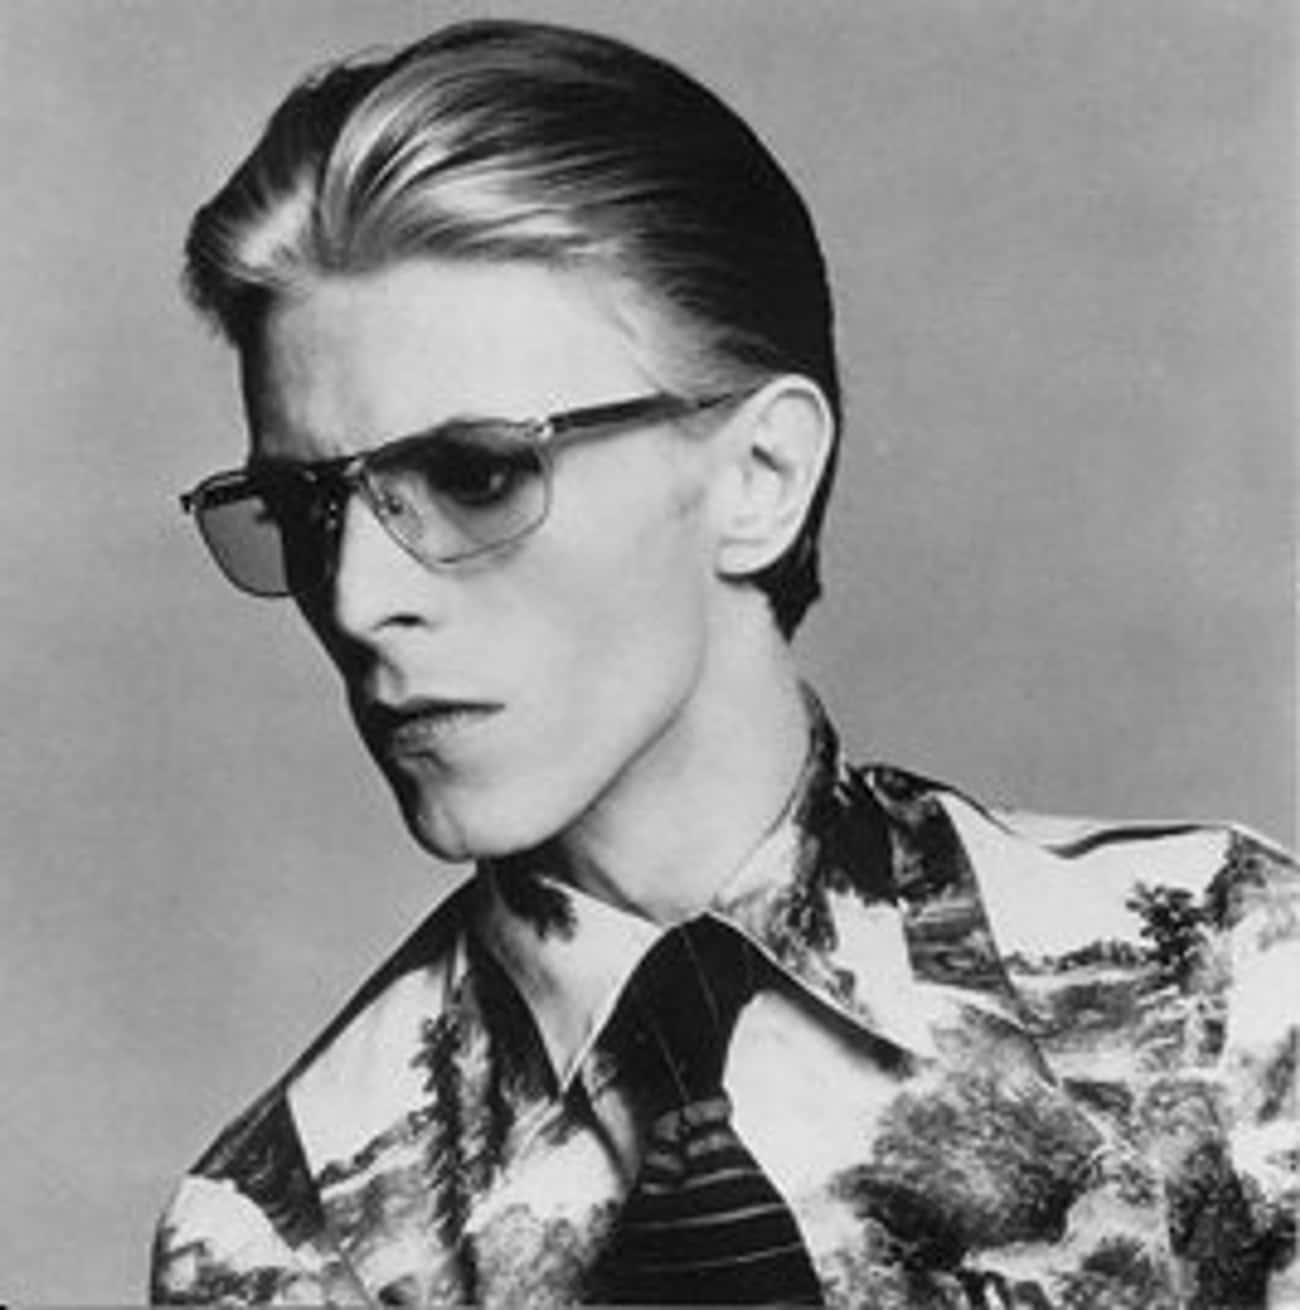 Young David Bowie in Sunglasses